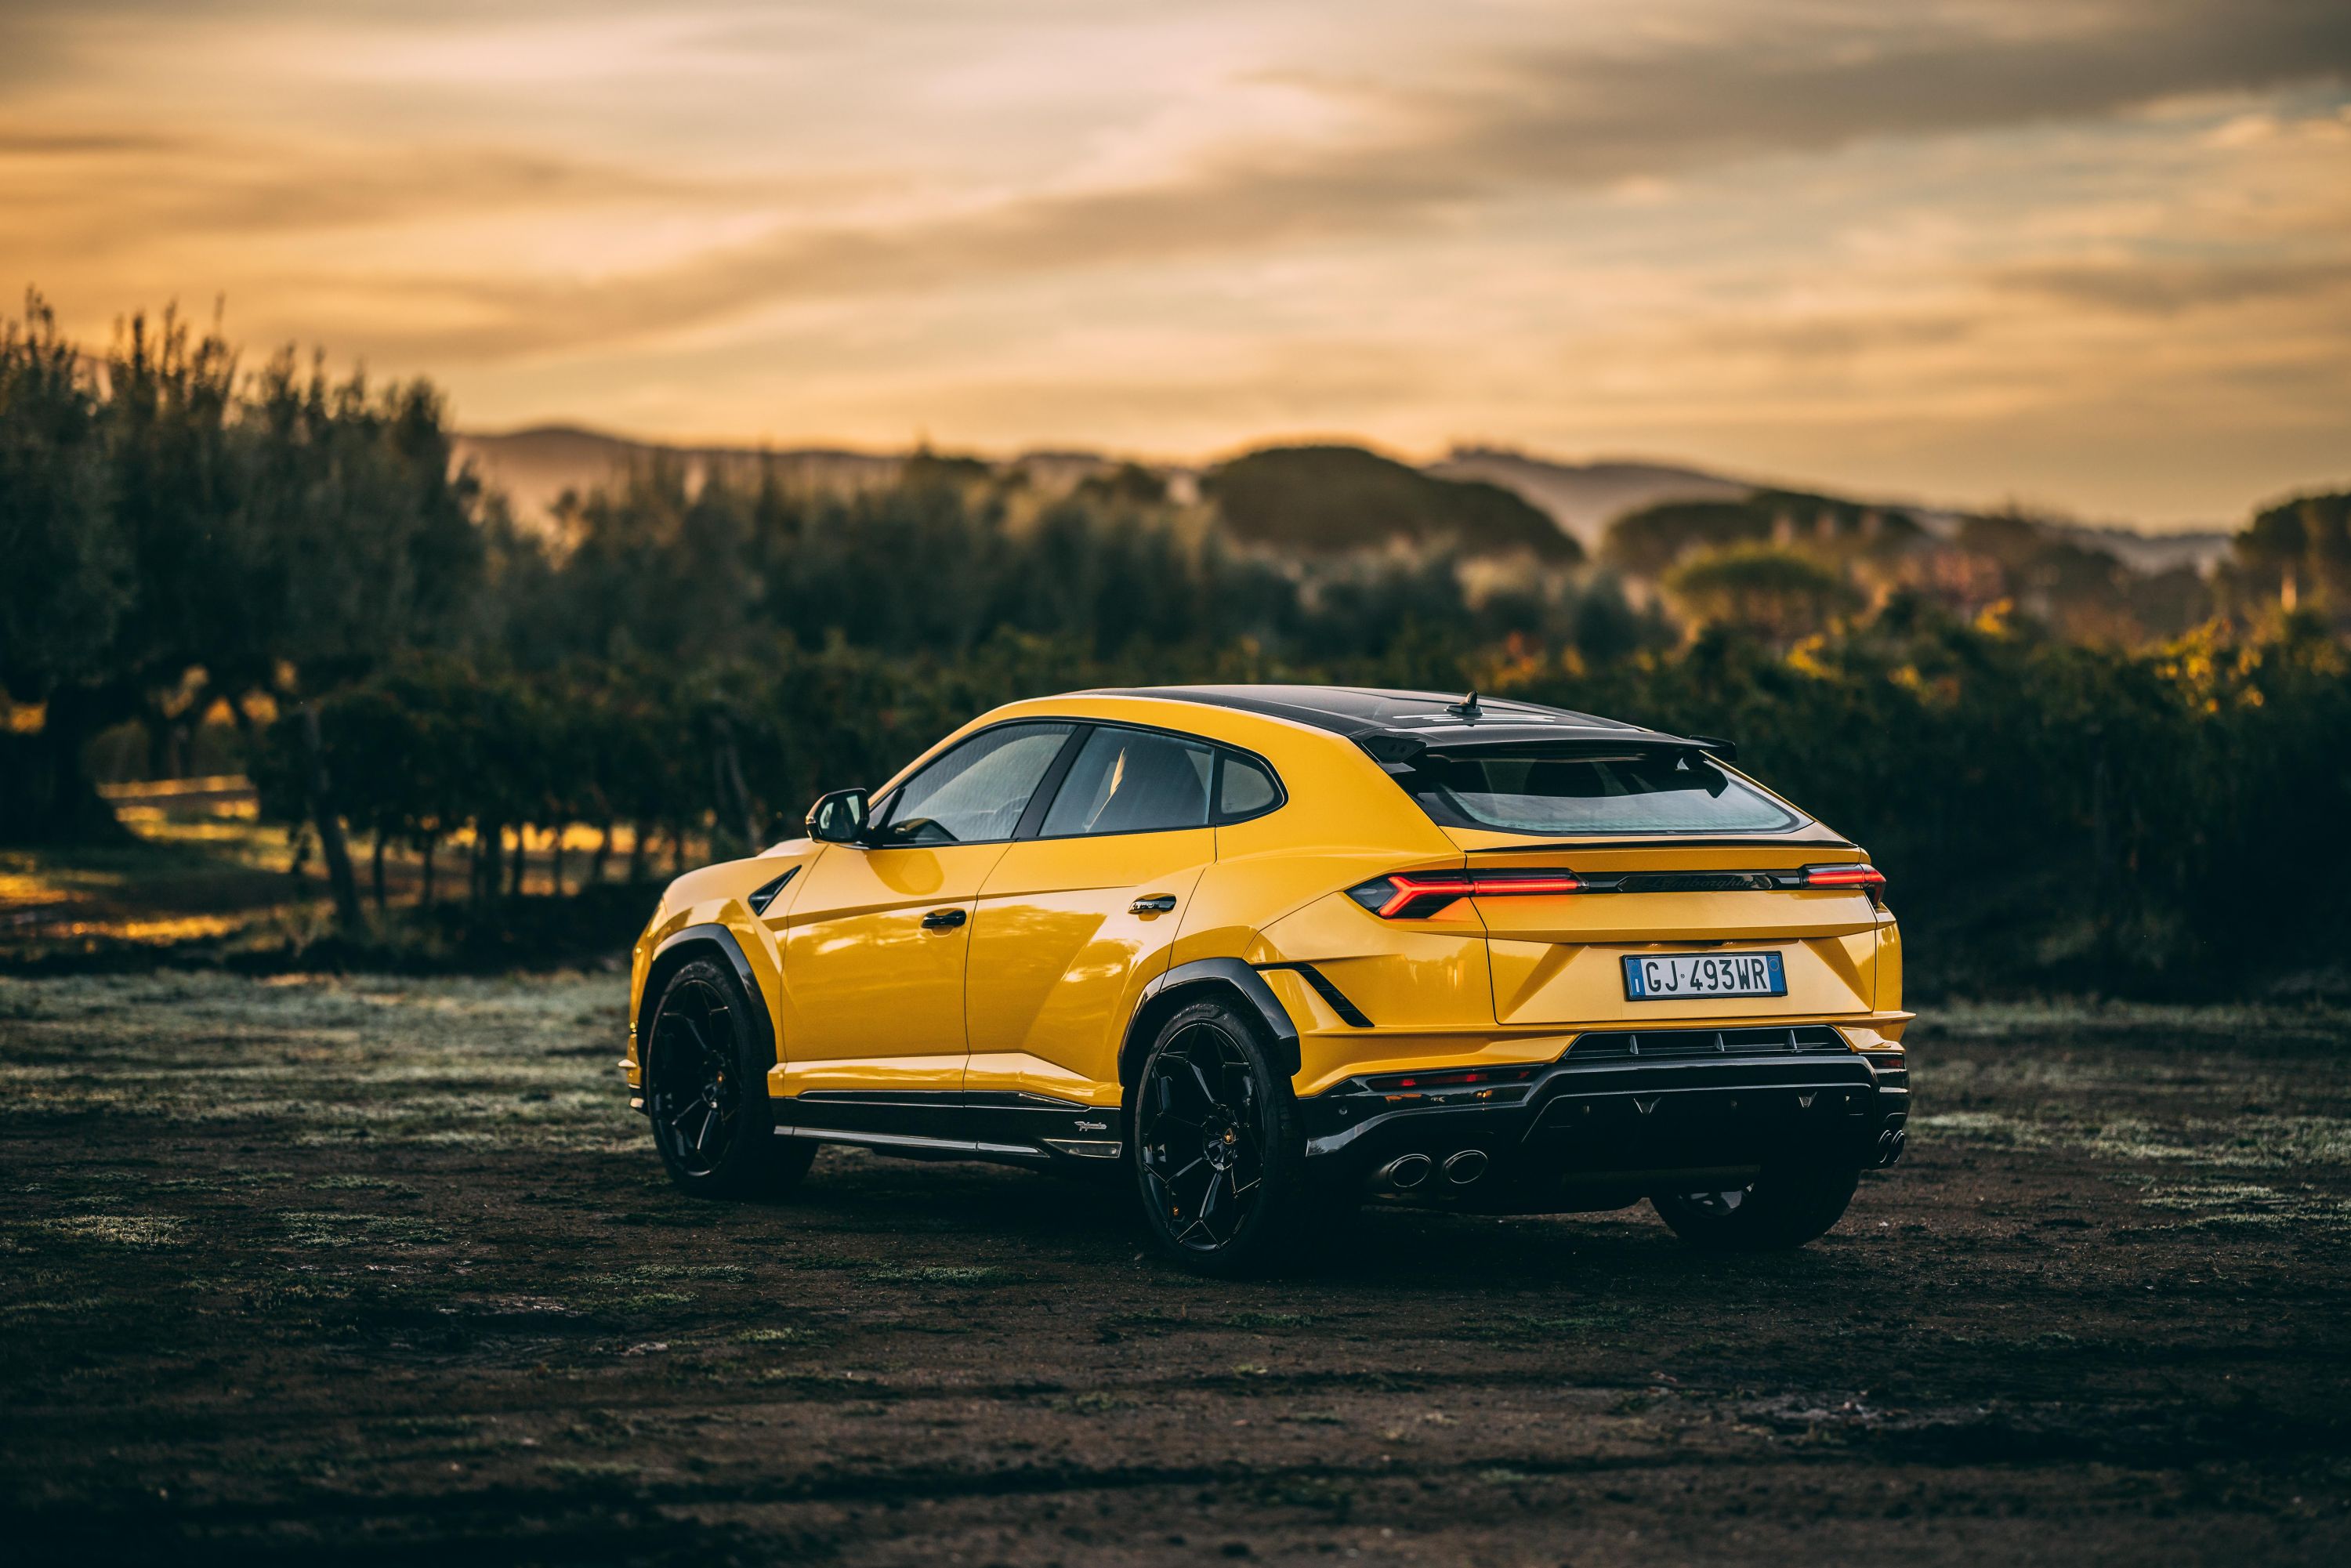 Lamborghini Urus Performante is all about power and style